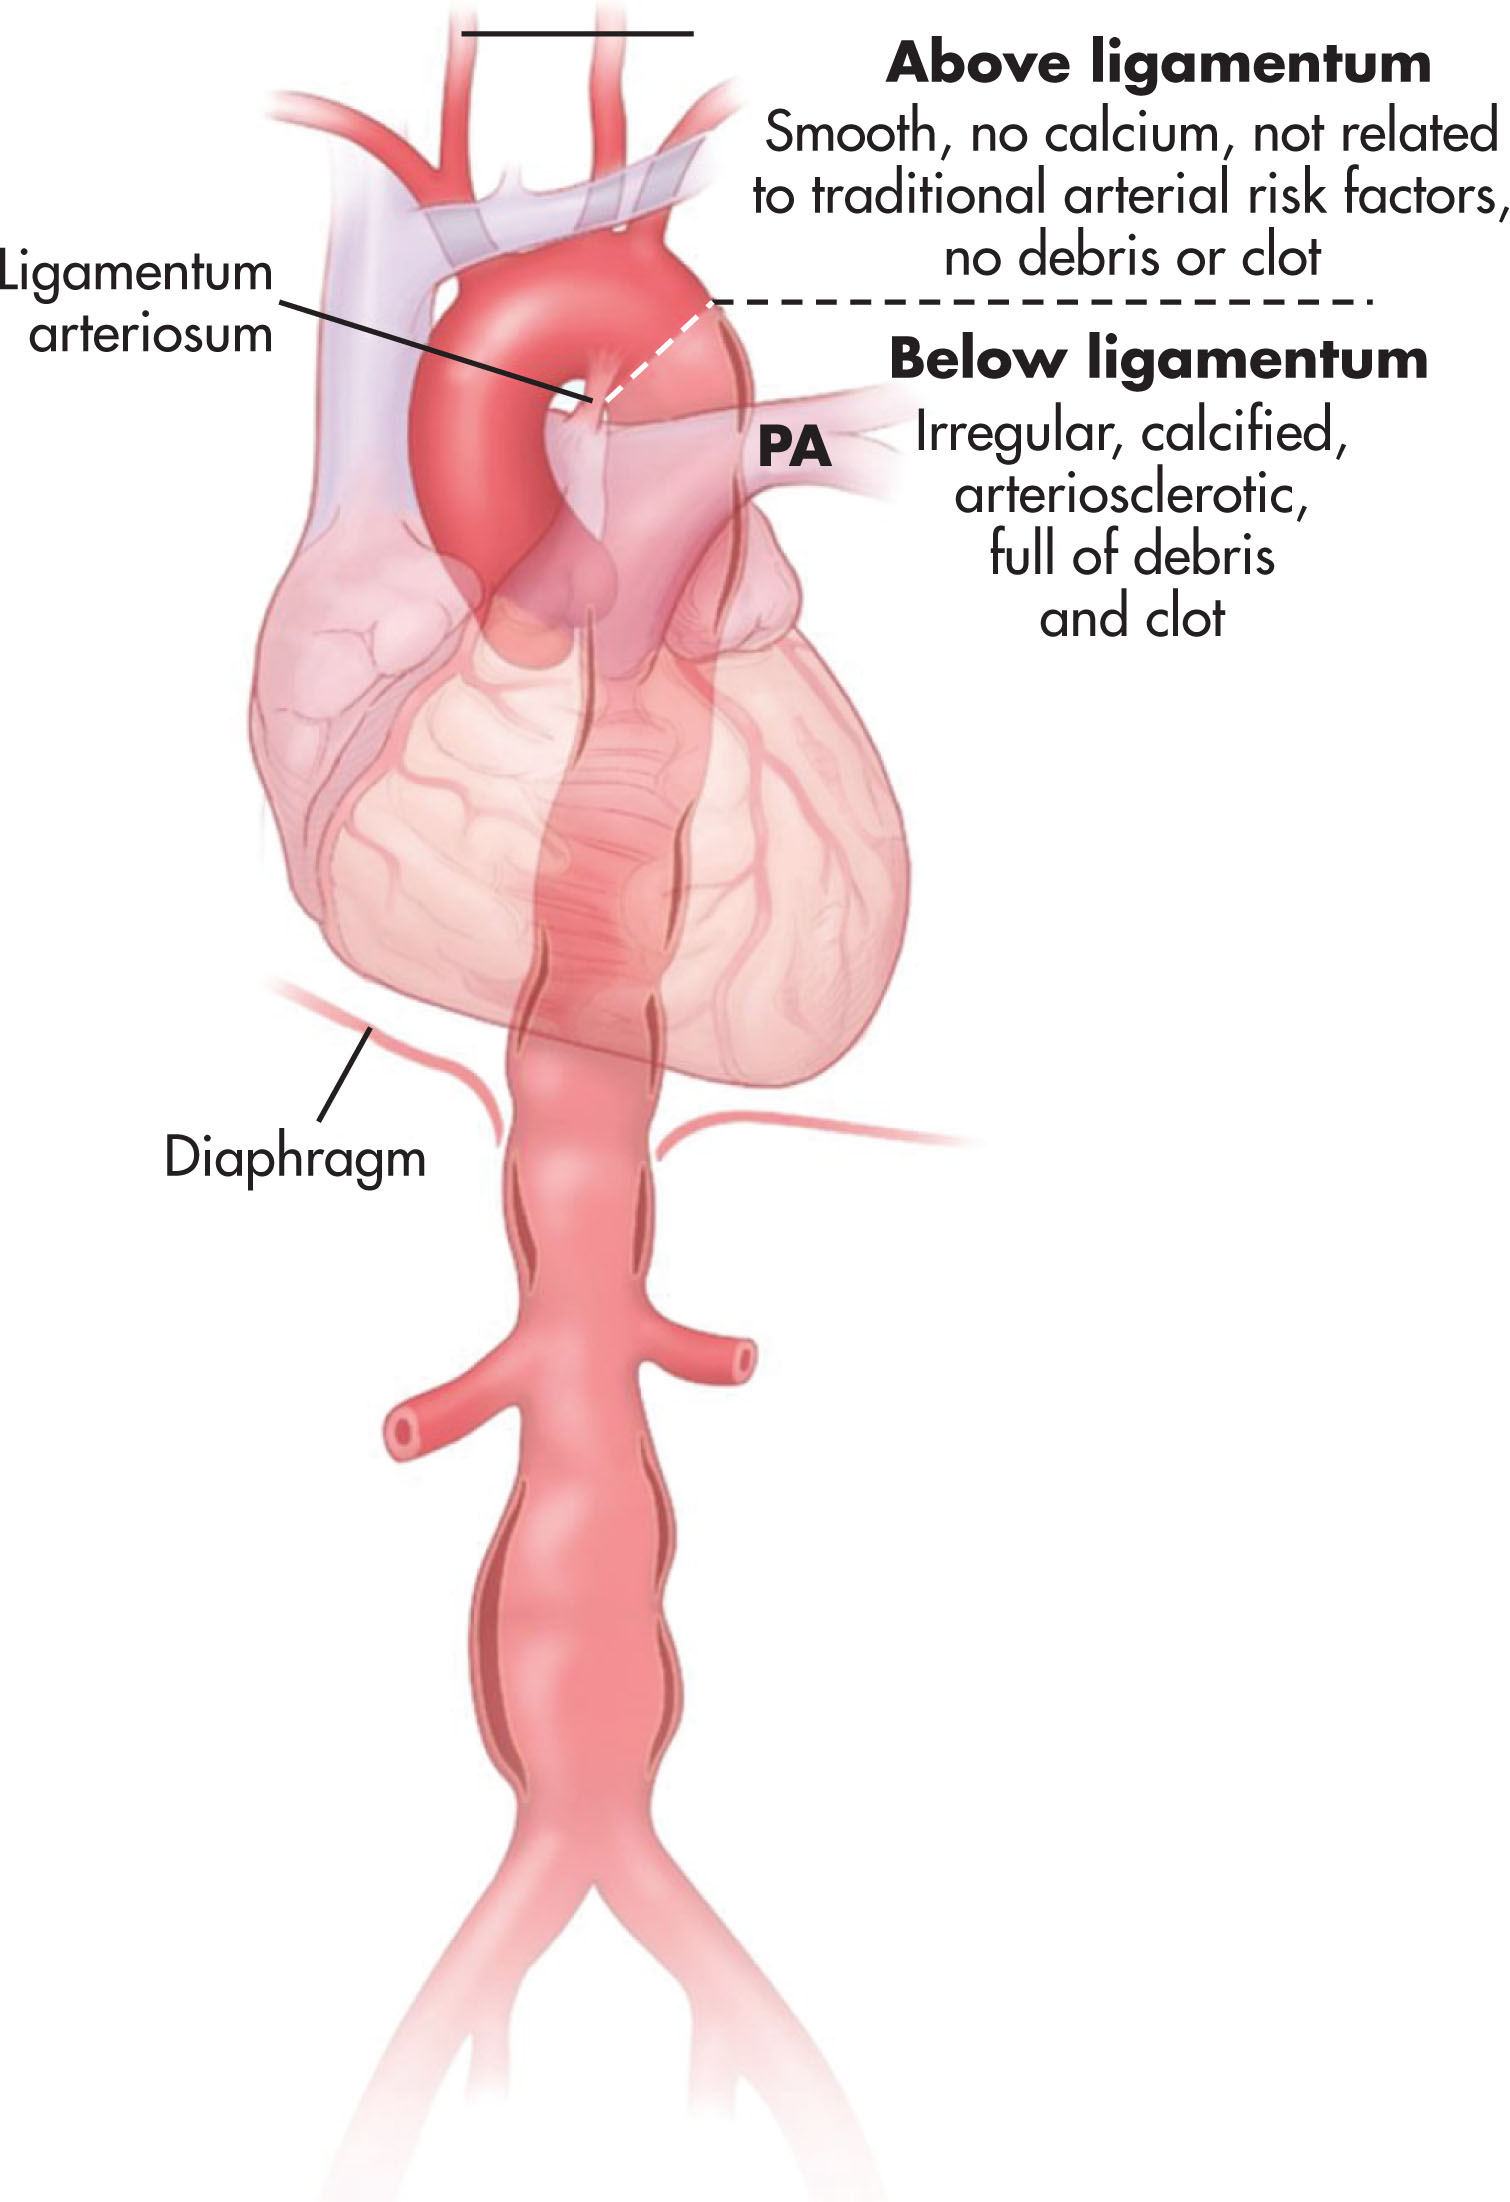 Fig. 8.26, Ectasia implies the diffuse dilation of a vessel, whereas an abdominal aortic aneurysm is a region of focal enlargement. PA , Pulmonary artery.